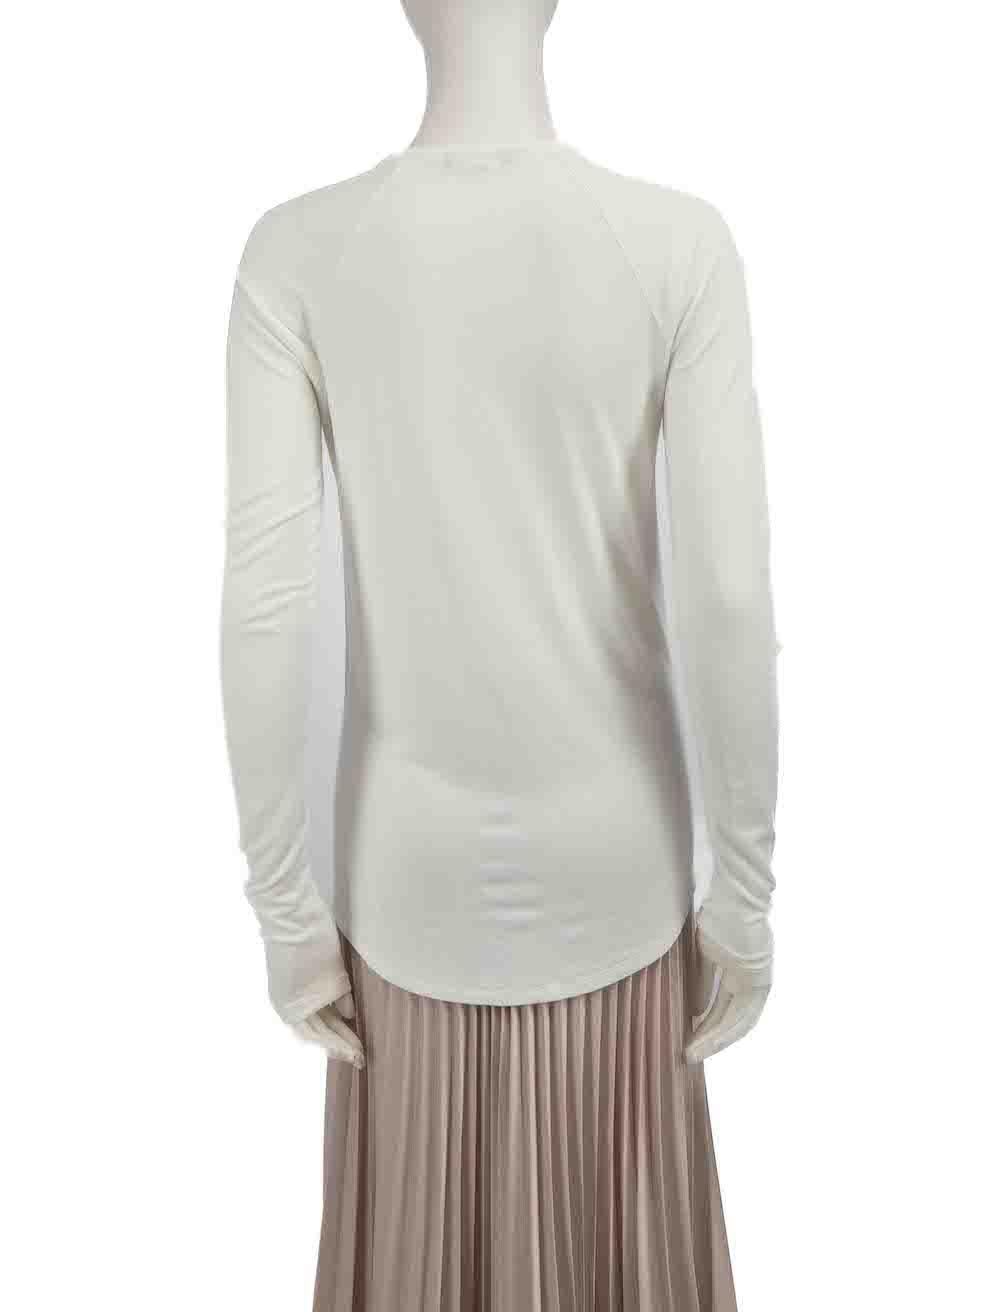 Balmain White Buttoned Shoulder Long Sleeve Top Size M In Good Condition For Sale In London, GB